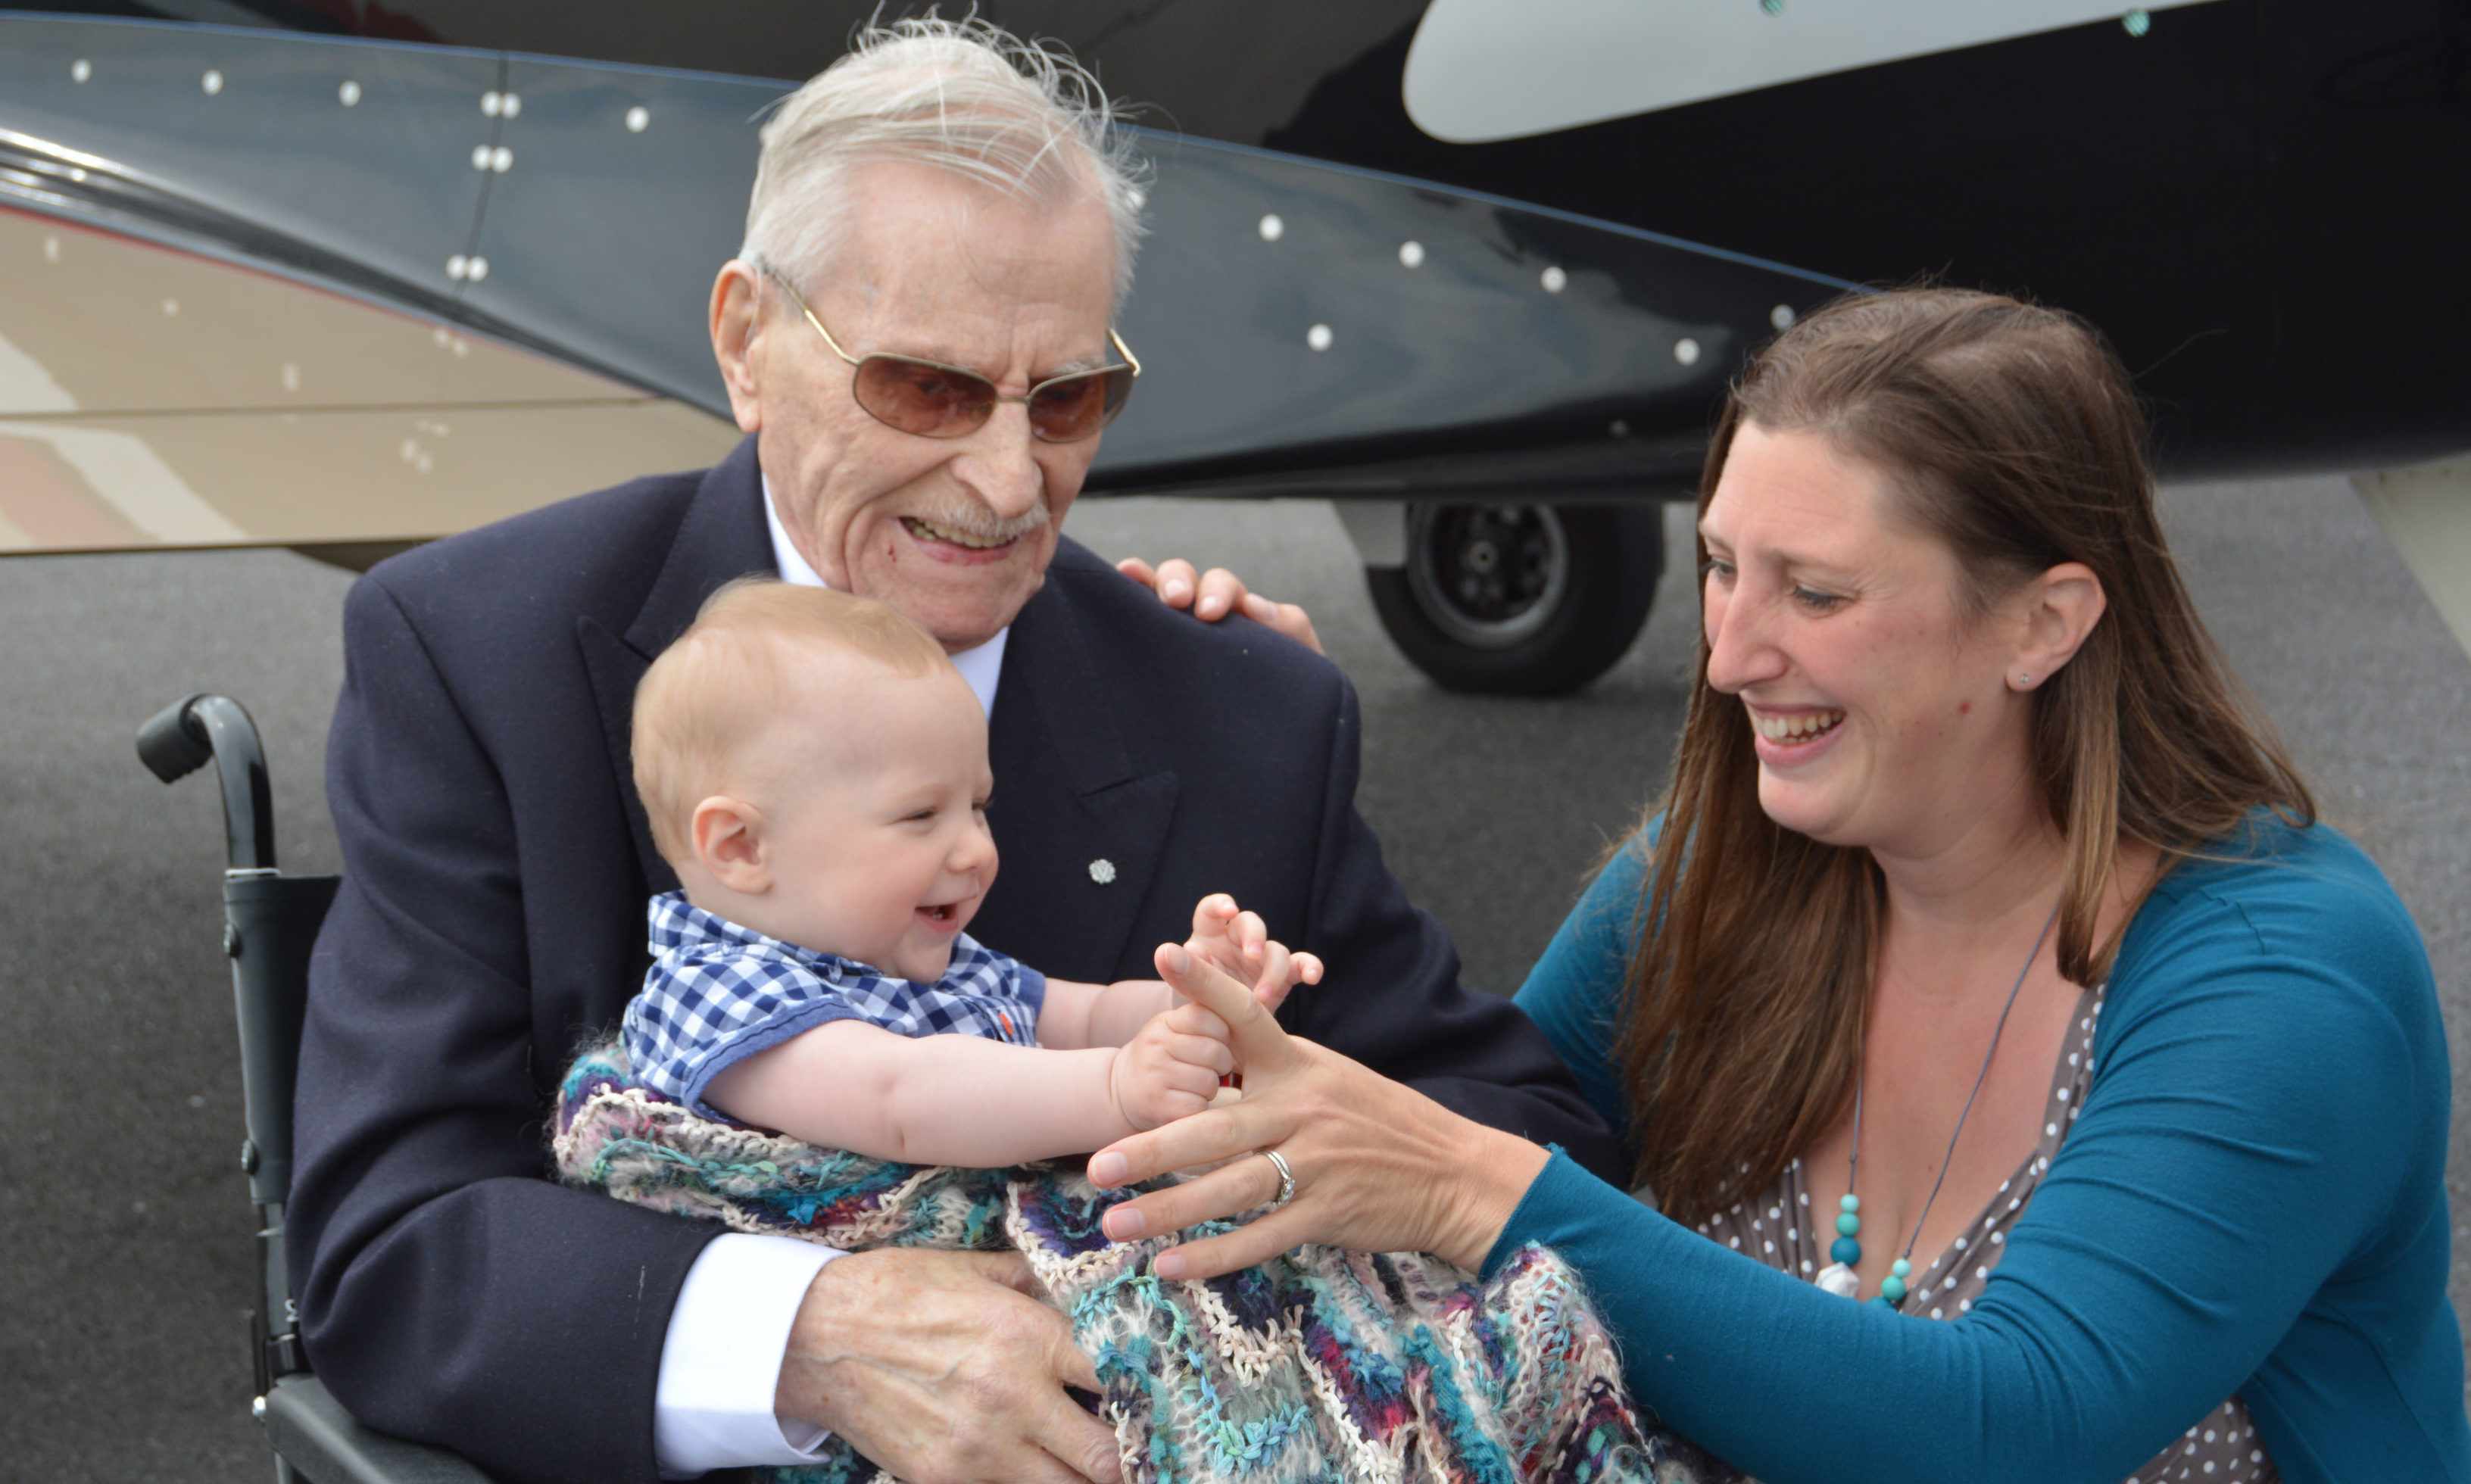 Flight Lieutenant Ernie Holmes DFC, meeting his great-grandson Henry for the first time at Coventry Airport, with Henry's mother Laura, as part of Project Propeller, an annual gathering of World War Two aircrew veterans.